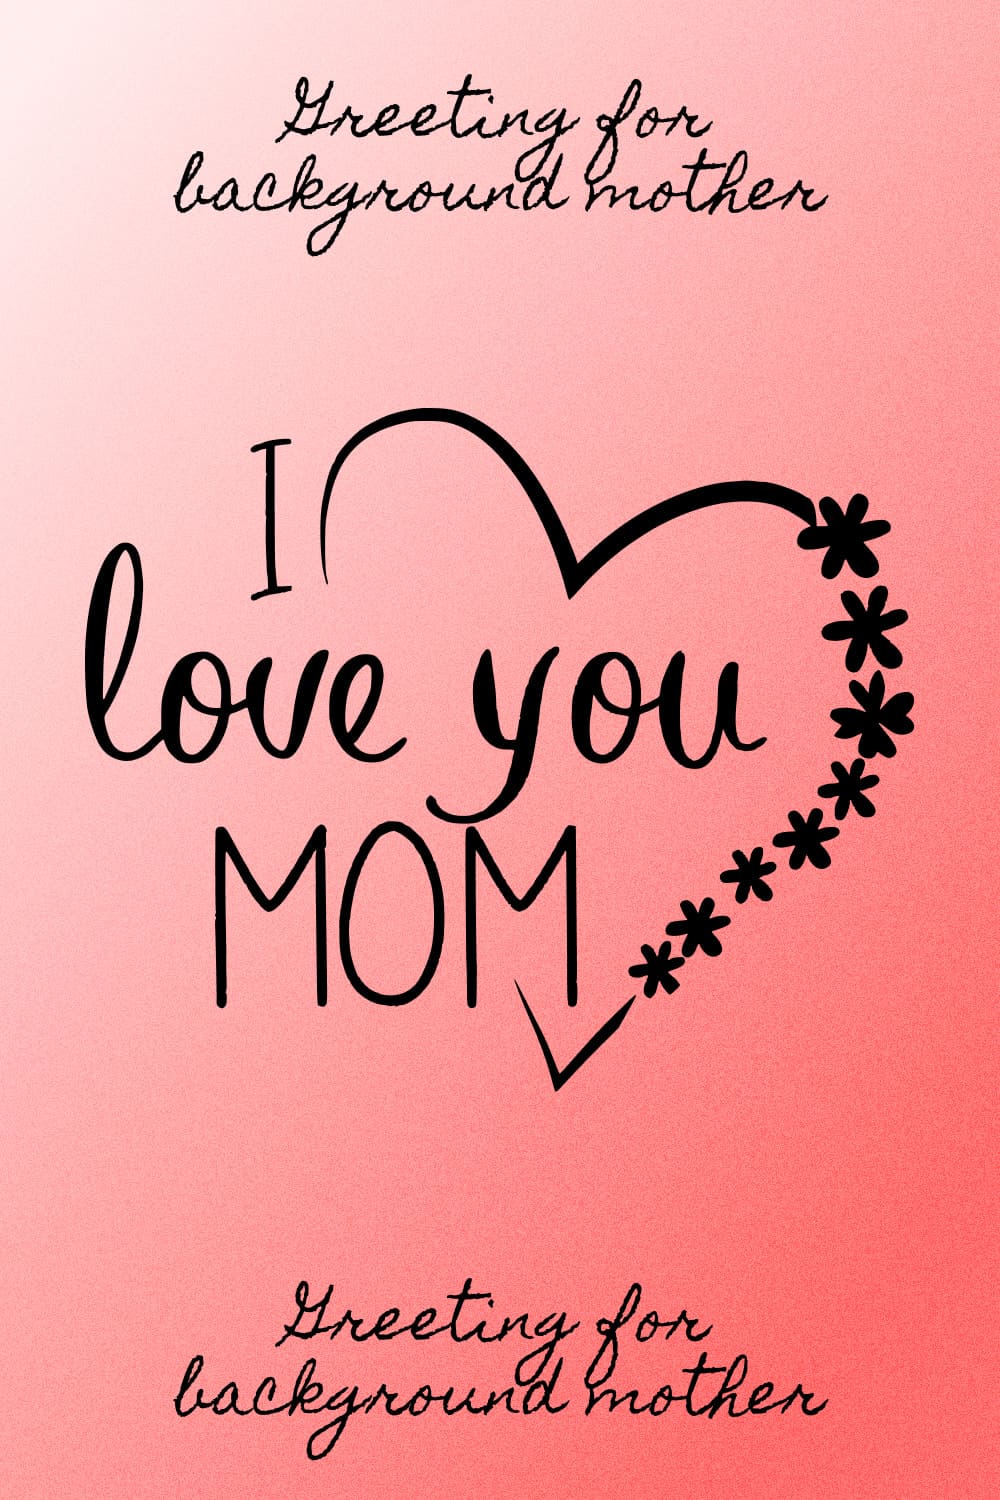 Greeting For Background Mother - Pinterest Image.